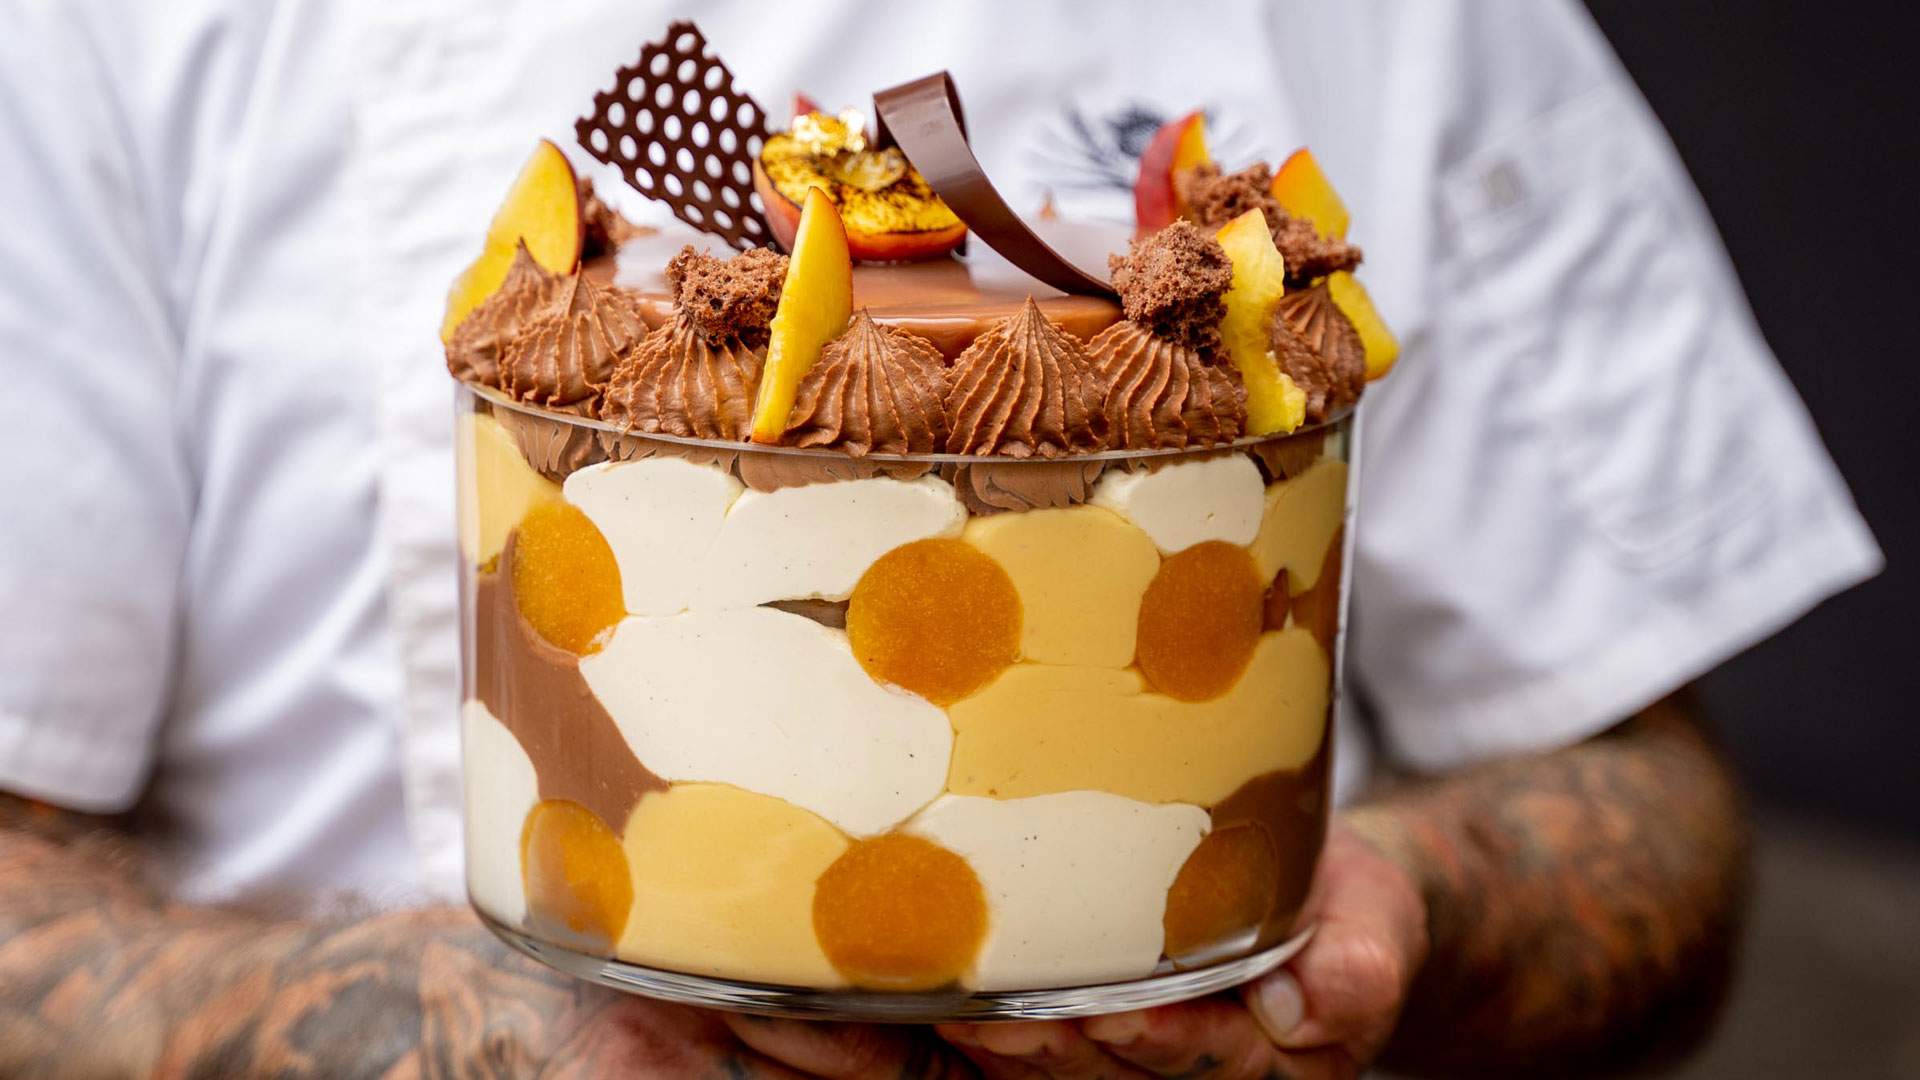 Textbook Patisserie Has Released Two OTT Trifles So You Can Win Christmas Lunch